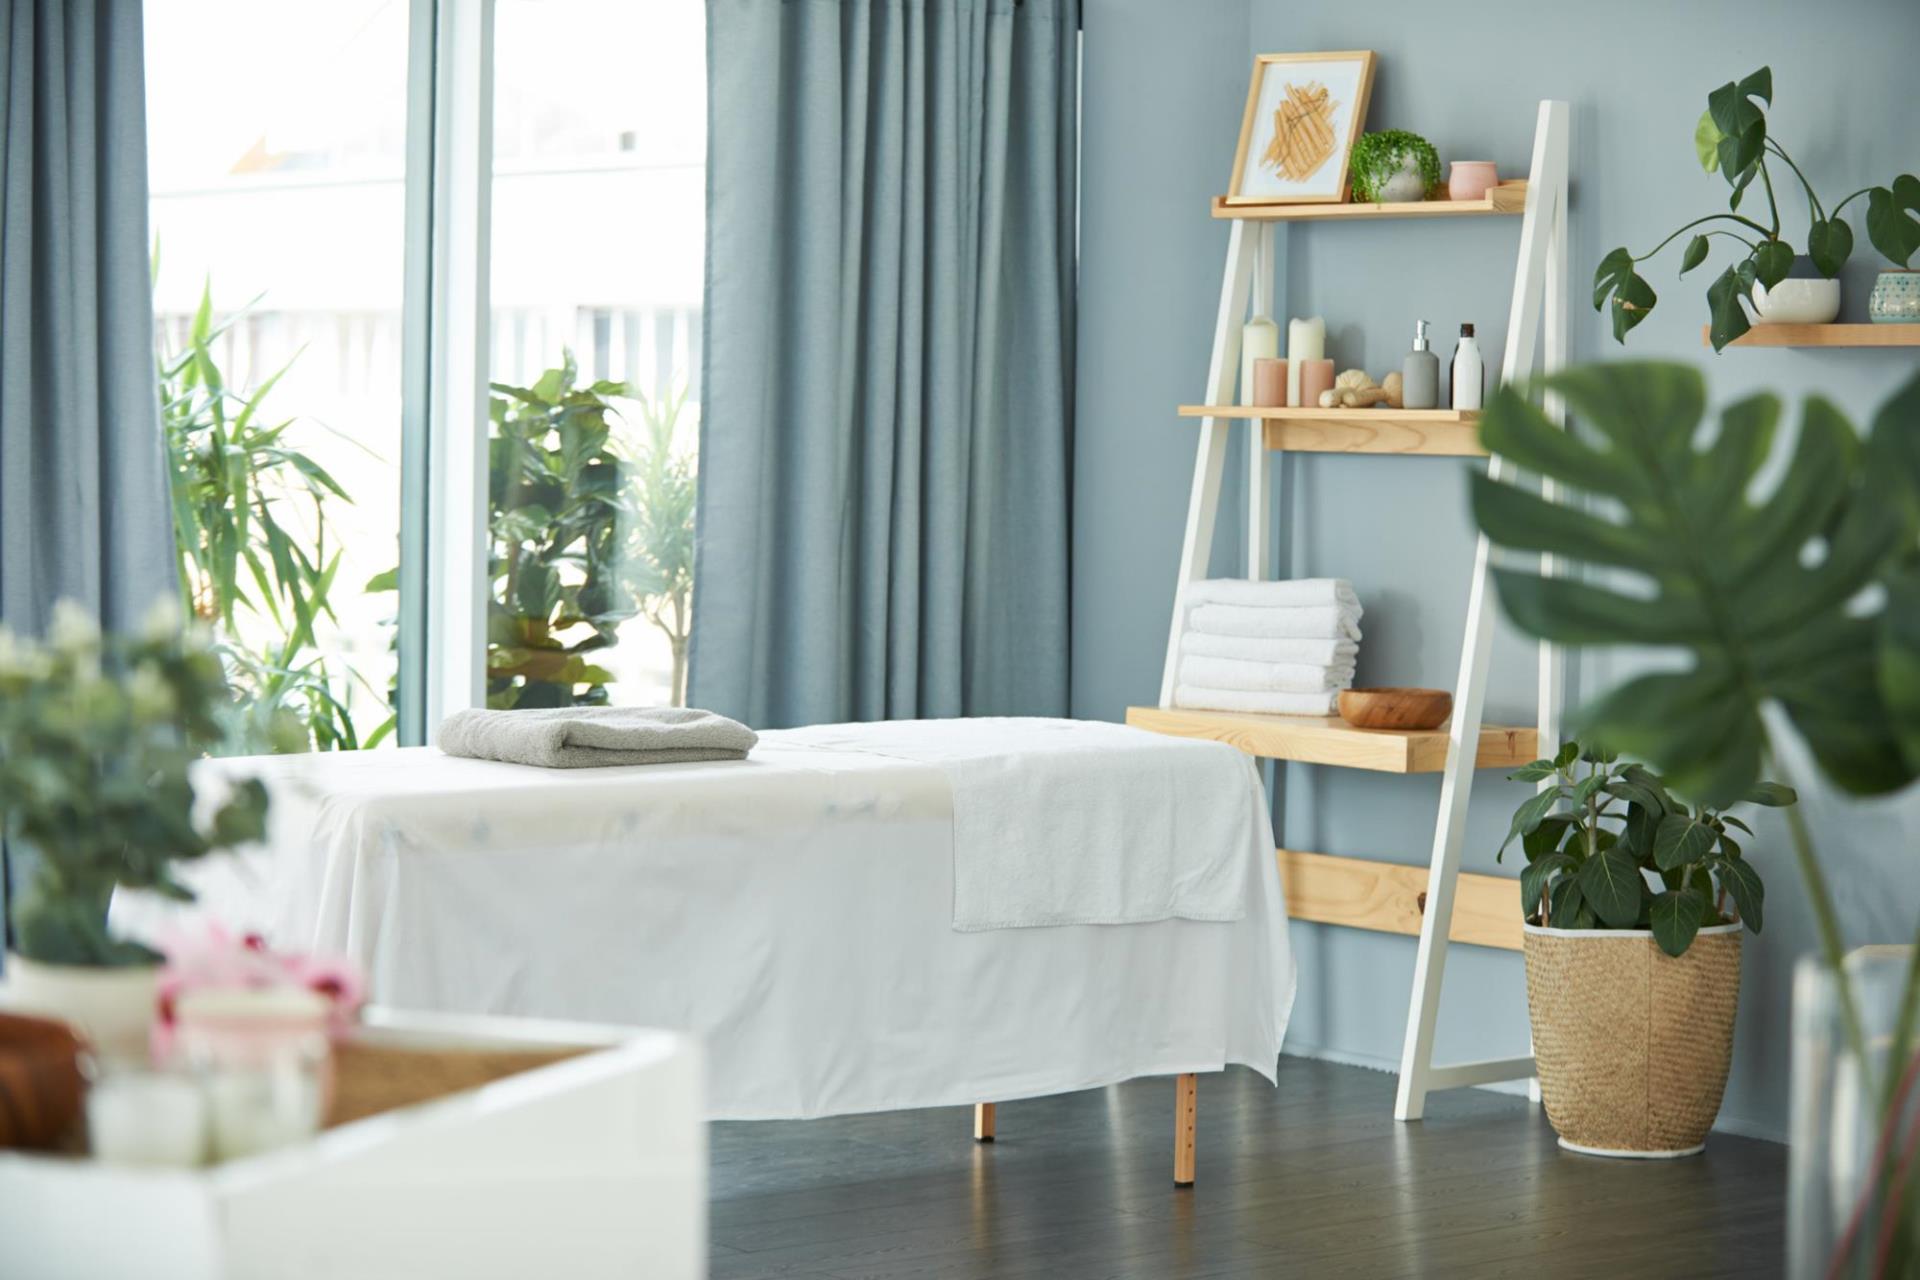 A massage table with table cloth, surrounded by house plants with a shelf nearby